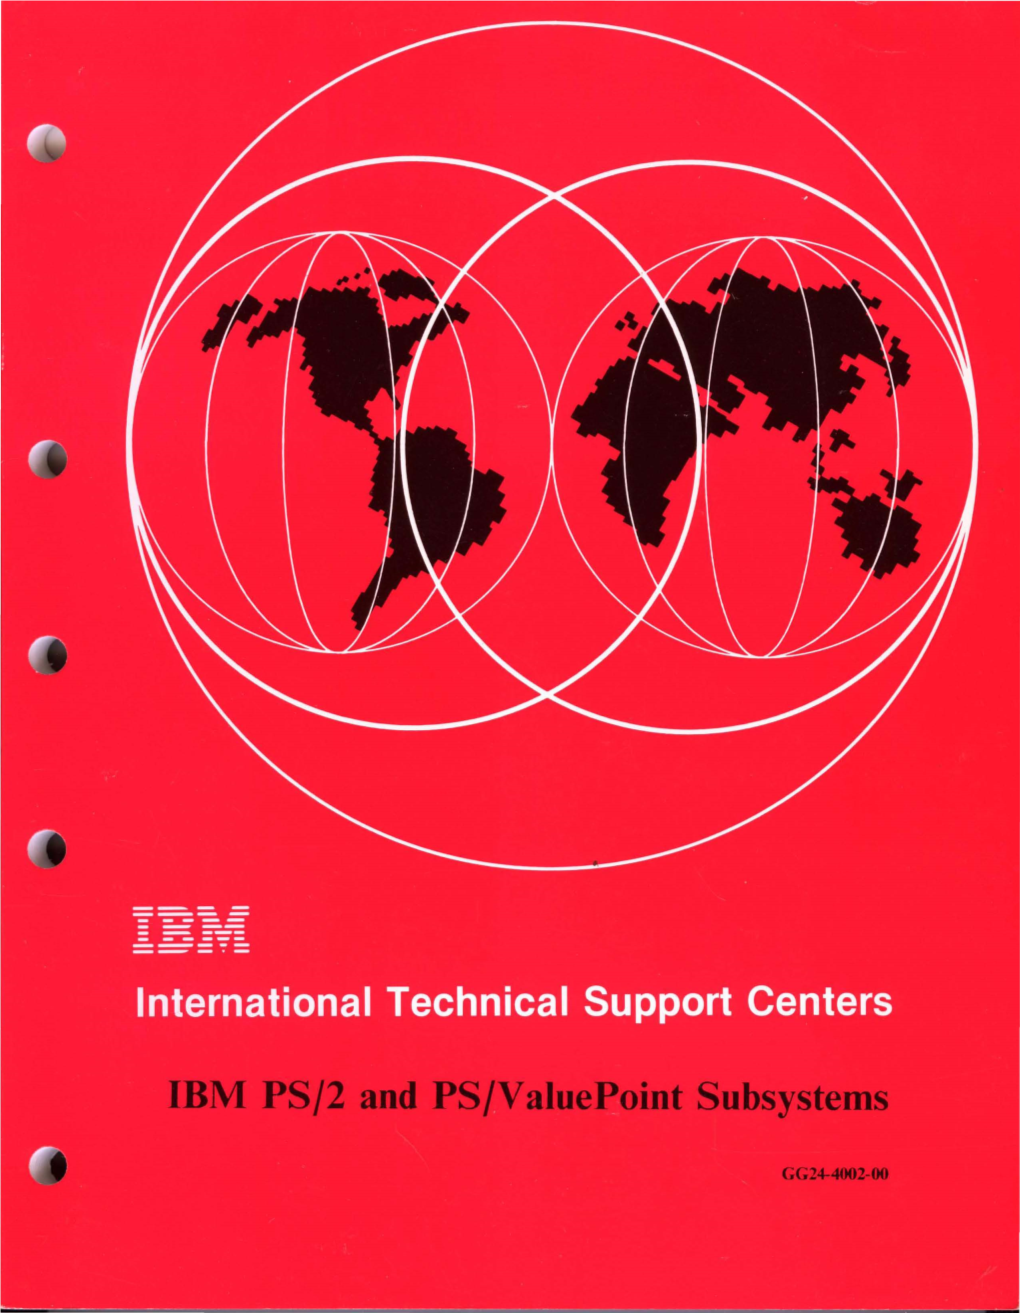 IBM PS/2 and PS/Vaiuepoint Subsystems